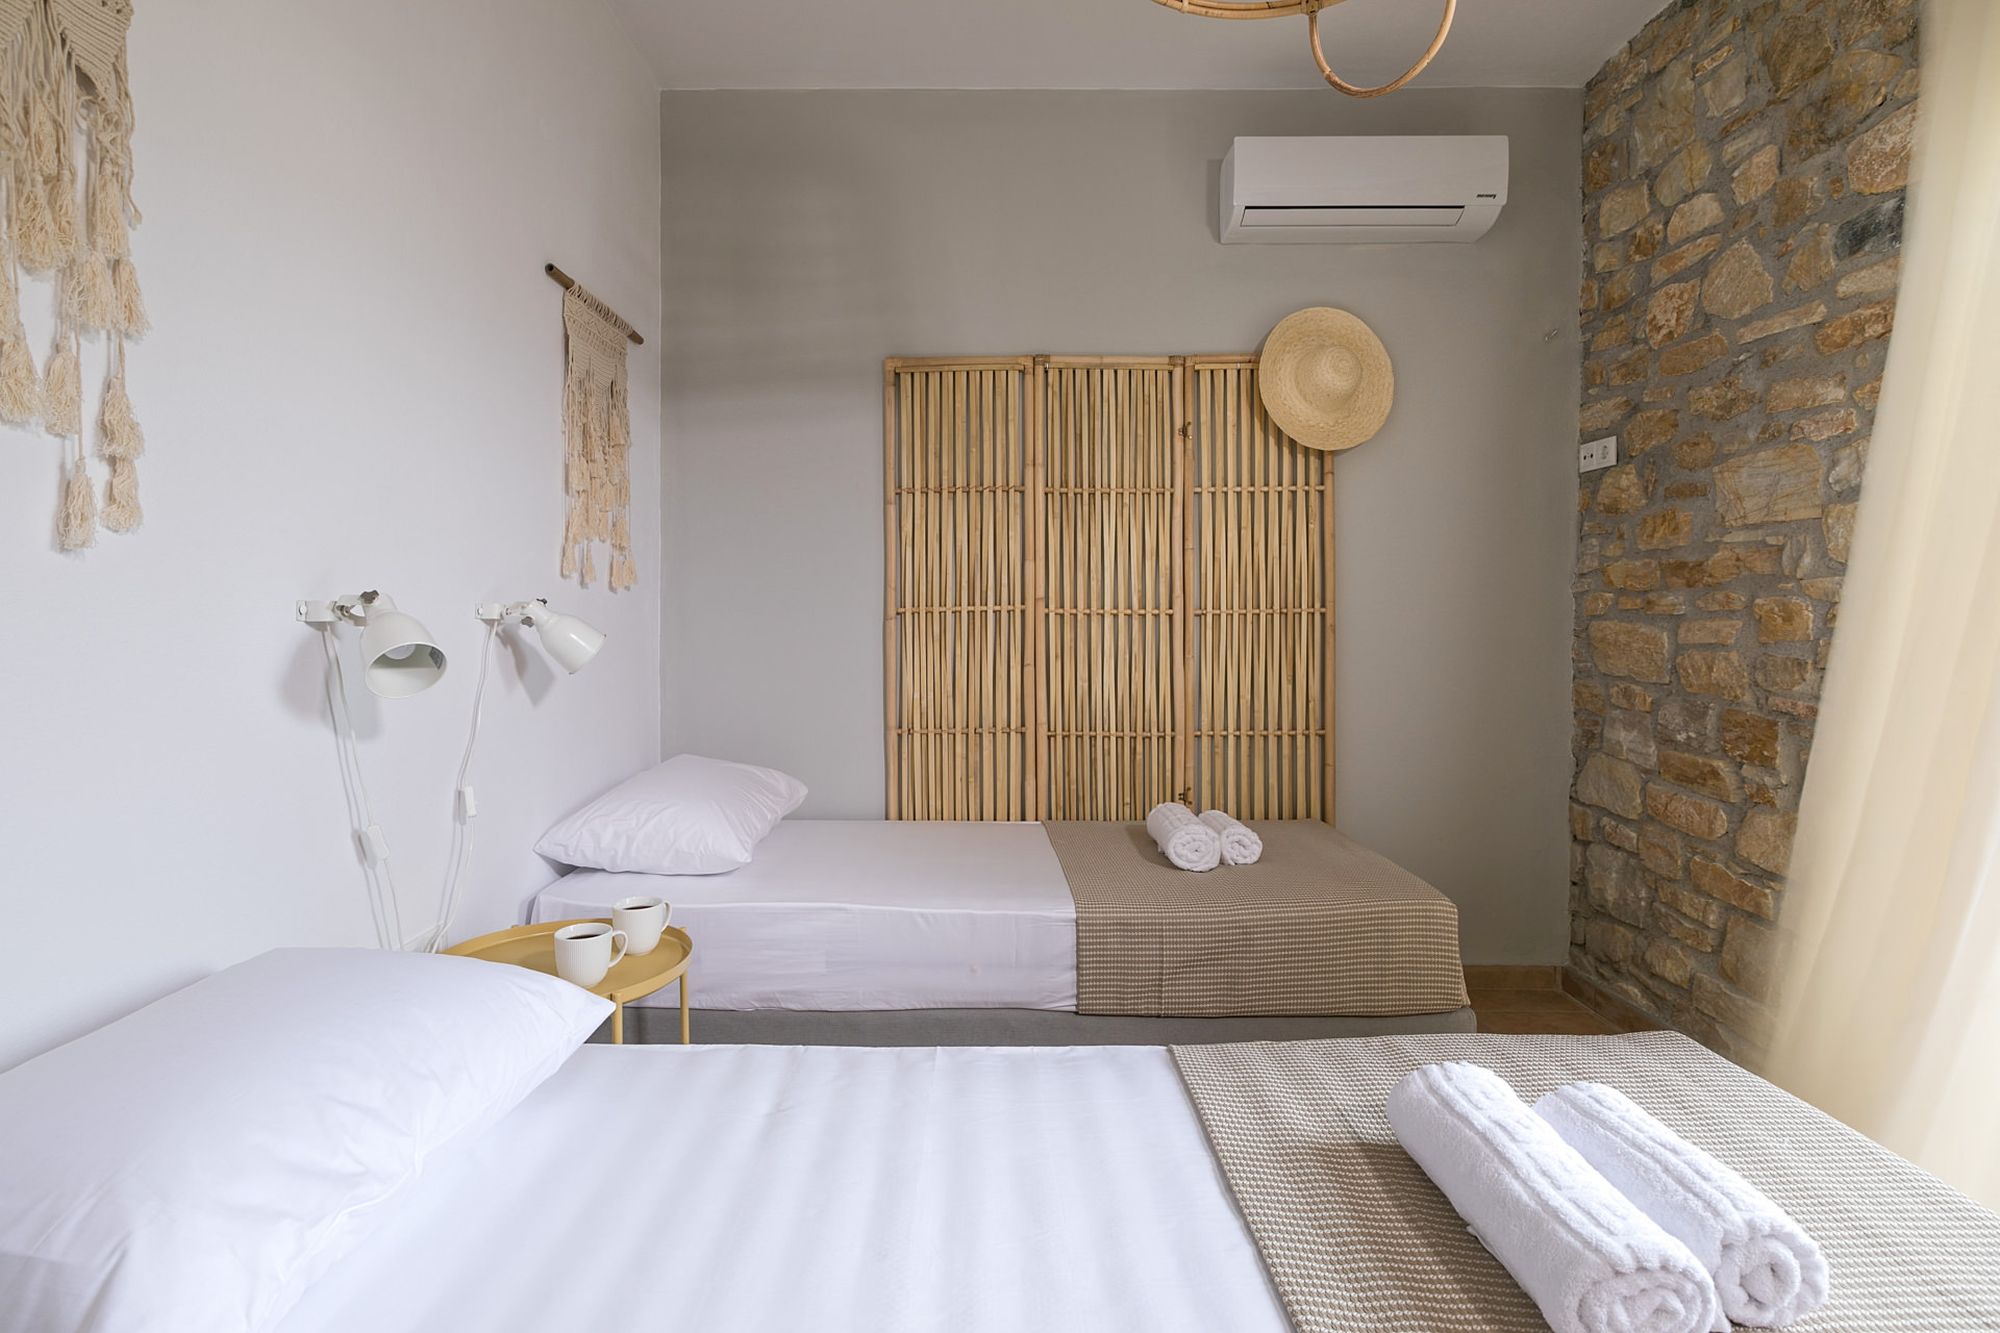 A twin bedroom of a stone-built residence decorated in boho style and in earth tones.      